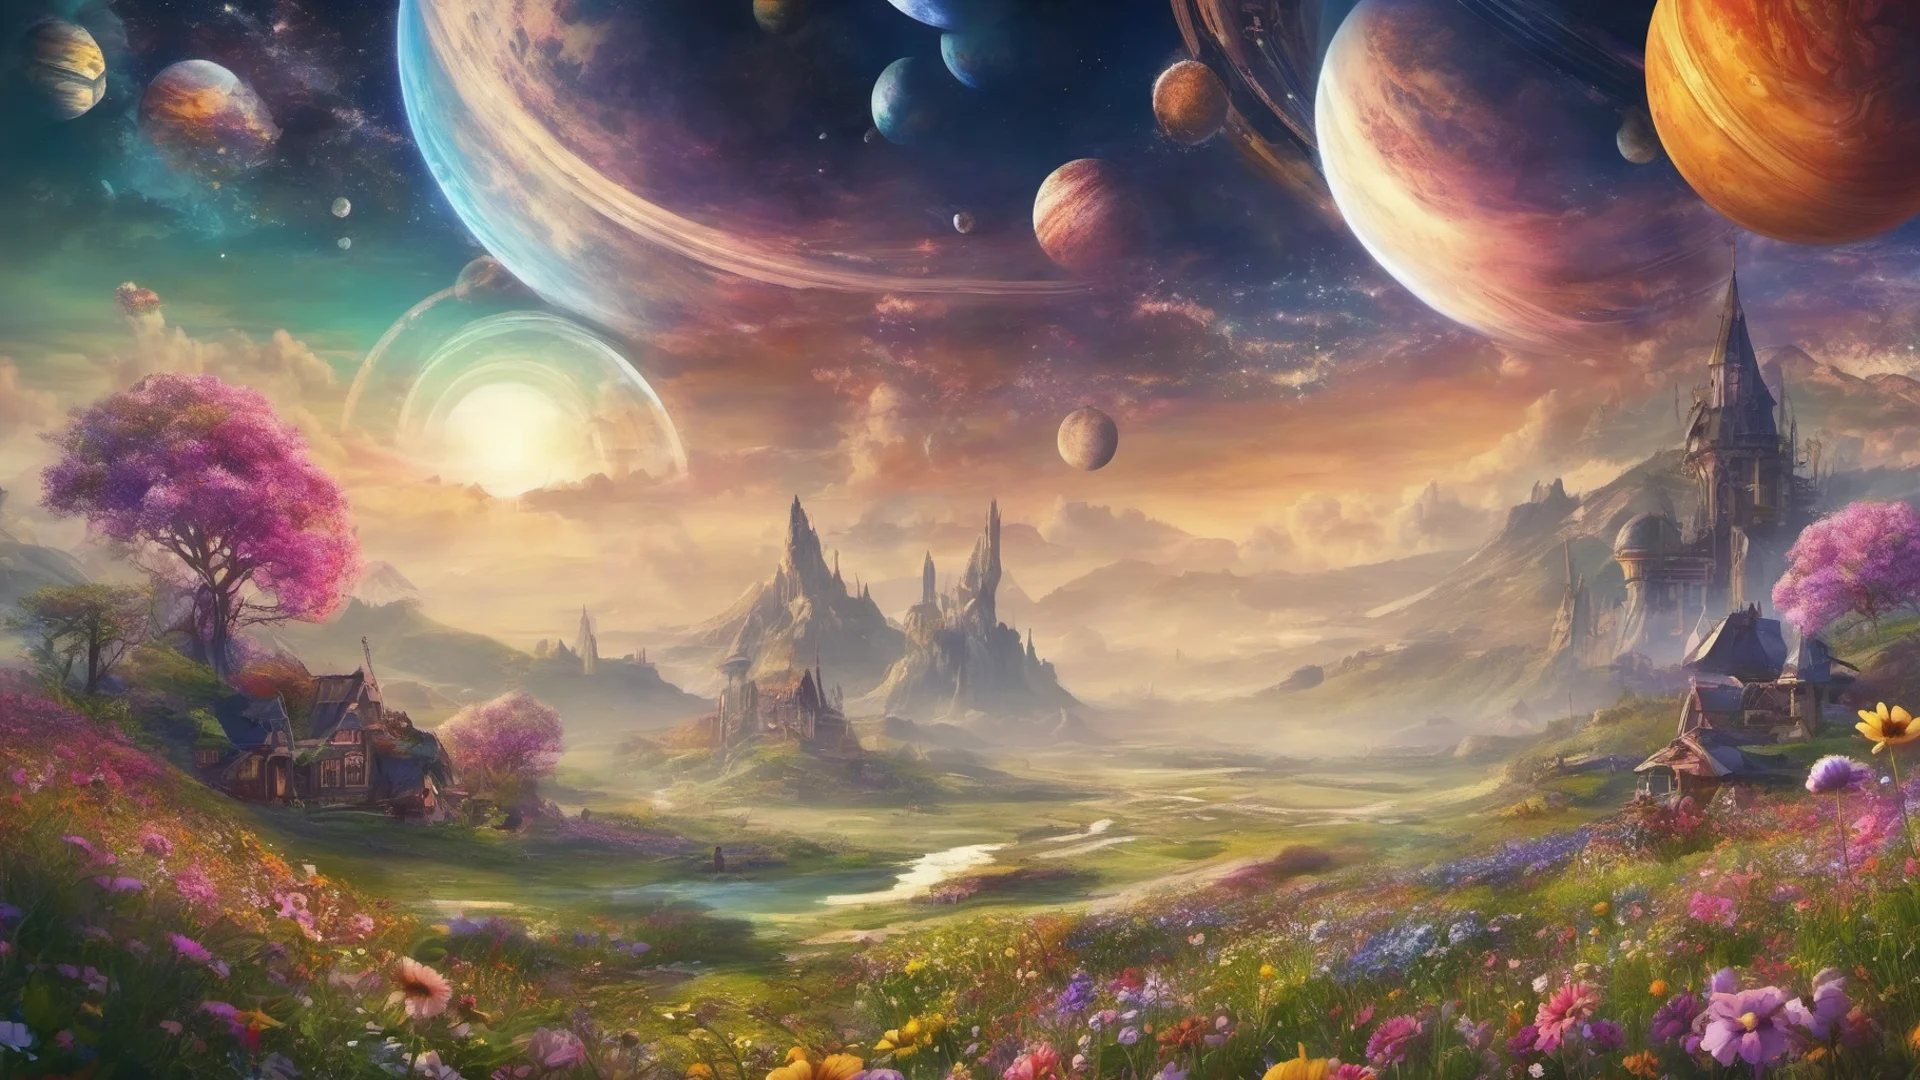 aiepic fantasy background colorful flower meadows village covered in flowers two saturn ringed planets overhead good looking trending fantastic 1 wide